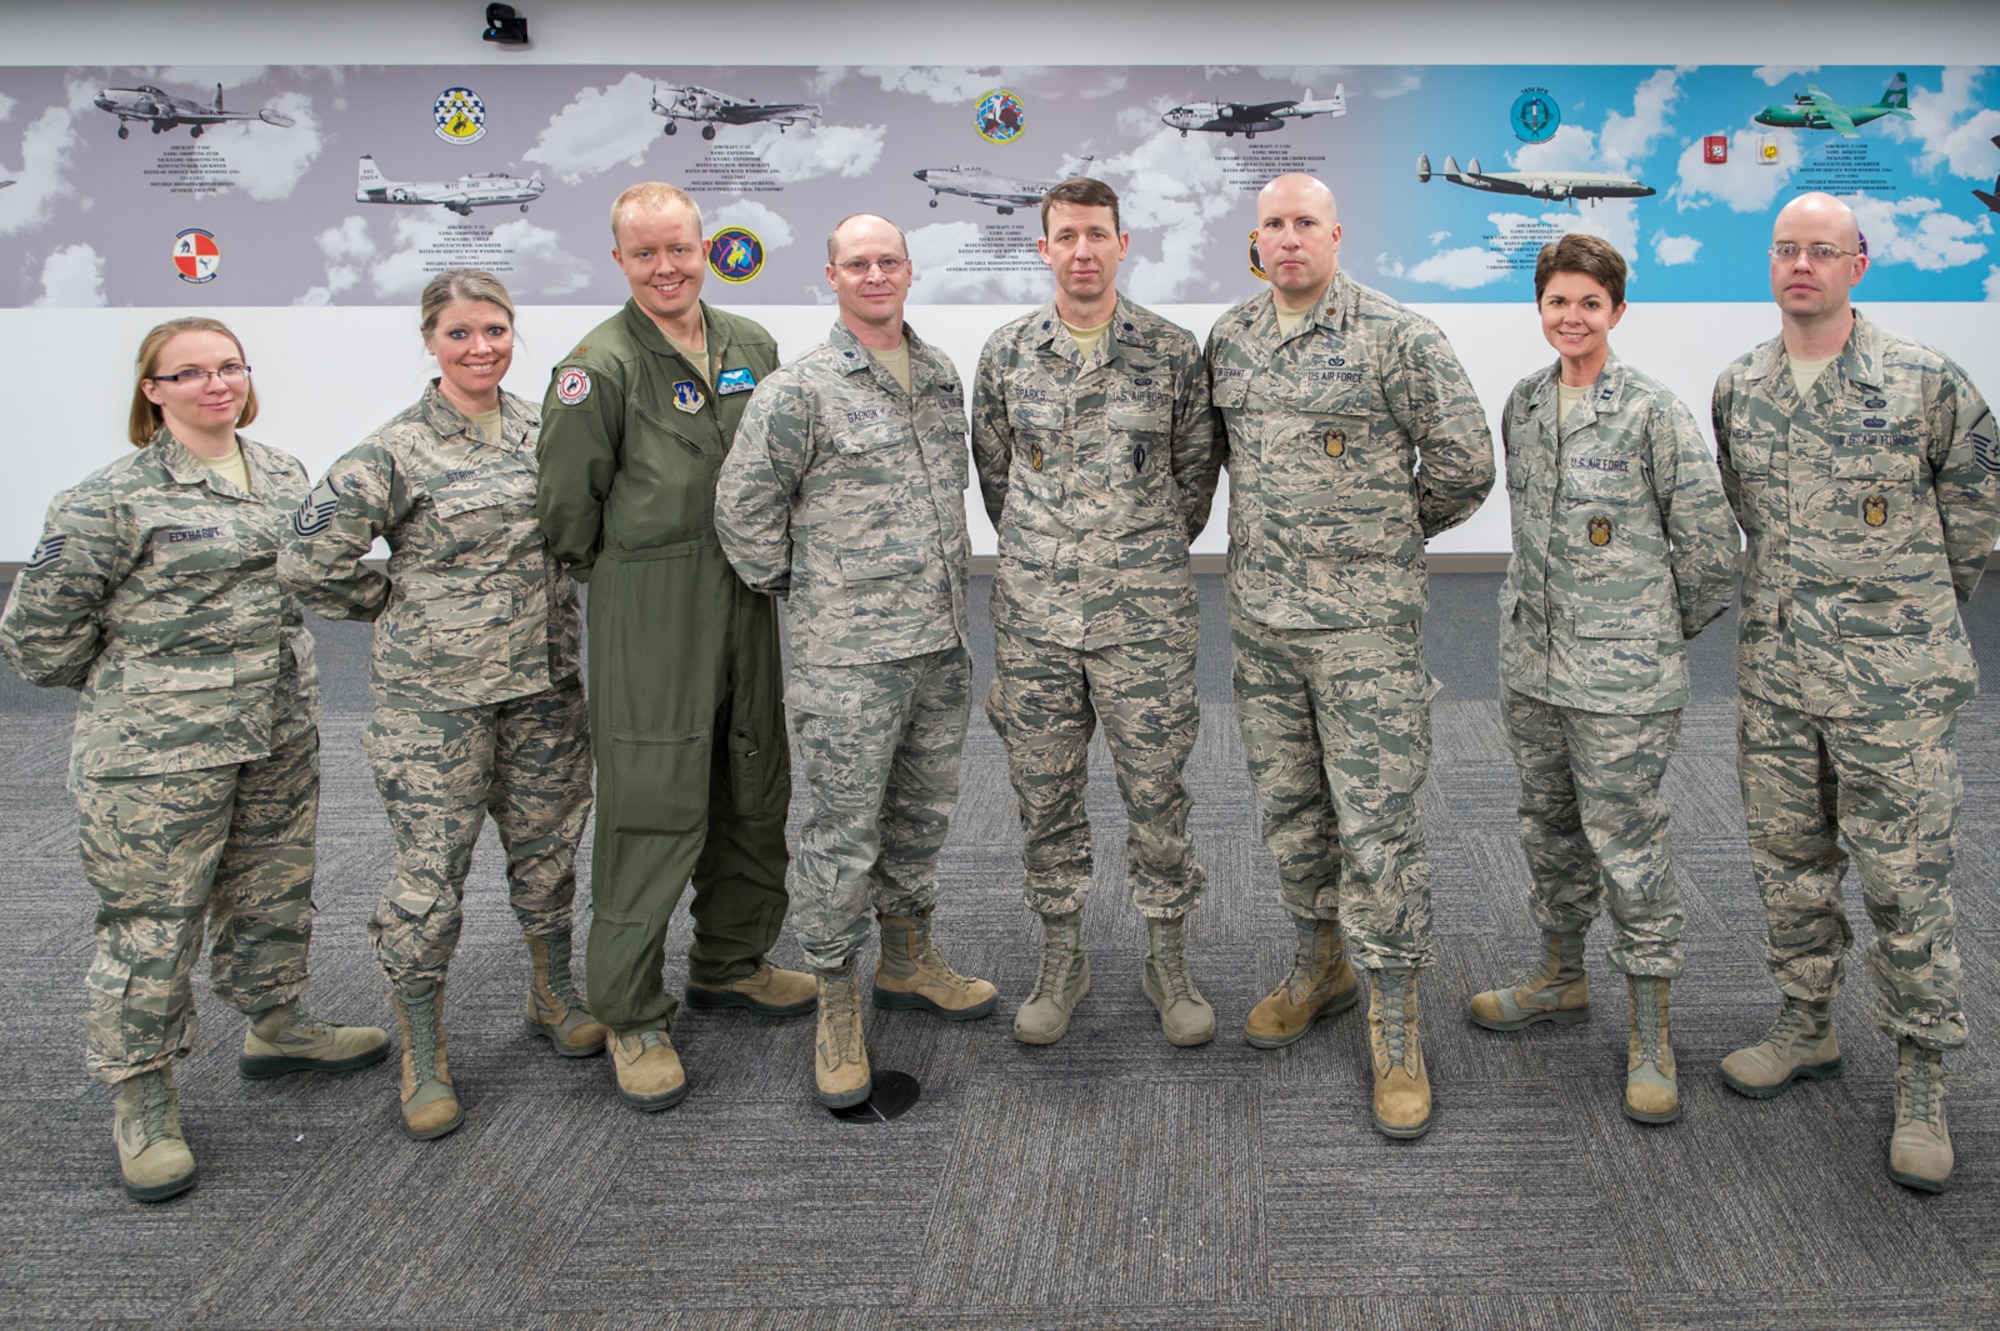 The 153rd Airlift Wing Inspector General team poses for a photo.